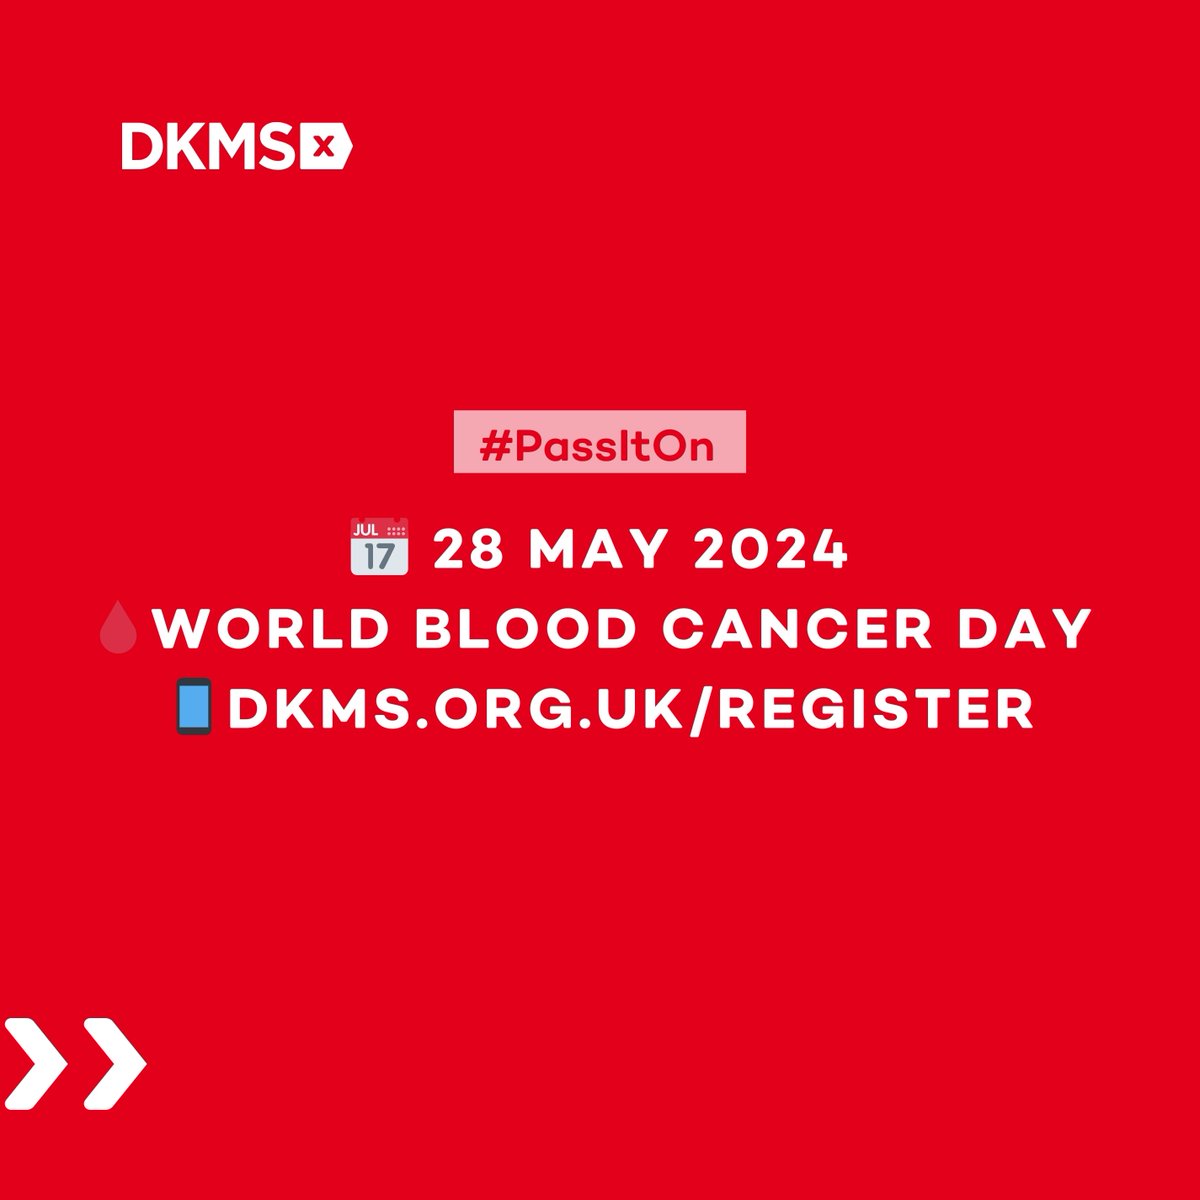 Mark your calendars, because #WorldBloodCancerDay is almost here! 🗓️ 28 May is our day to shine a light on blood cancer and disorders. 💪 We're on a mission to spread awareness about the power of action because we ALL can make a difference. 🙌 Will you join us?